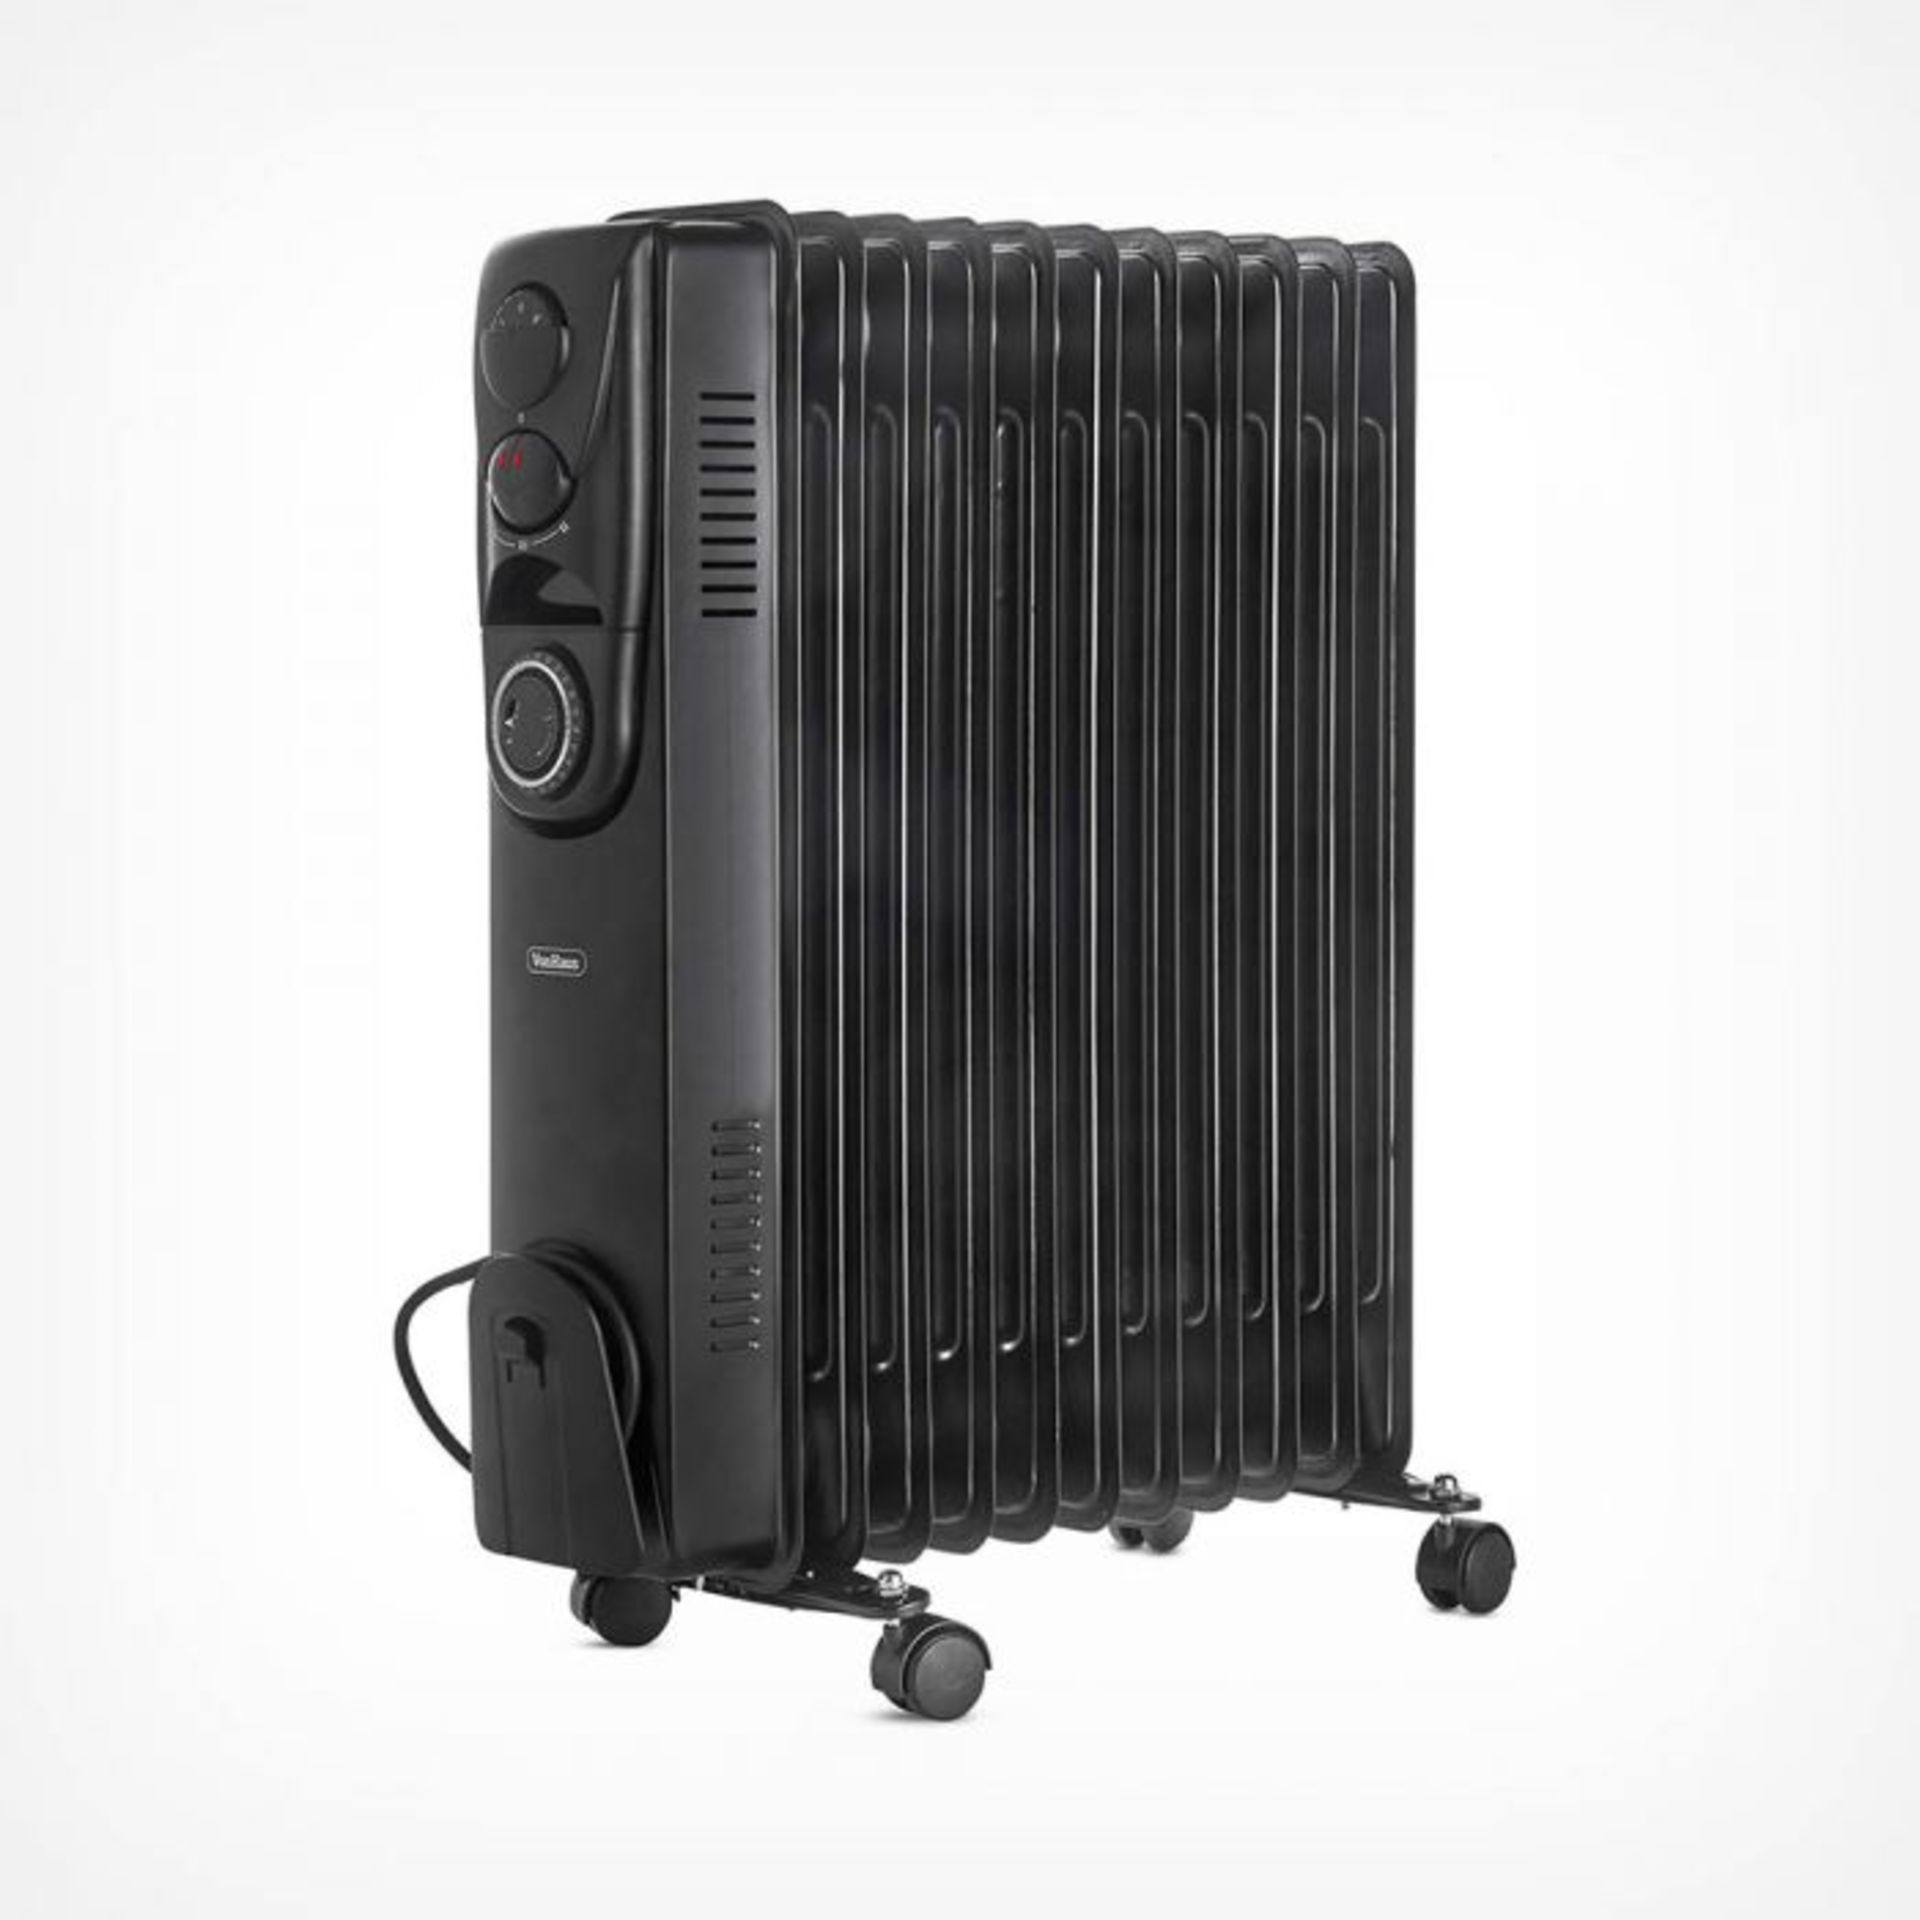 (S420) 11 Fin 2500W Oil Filled Radiator - Black 2500W radiator with 11 oil-filled fins for hea... - Image 2 of 4